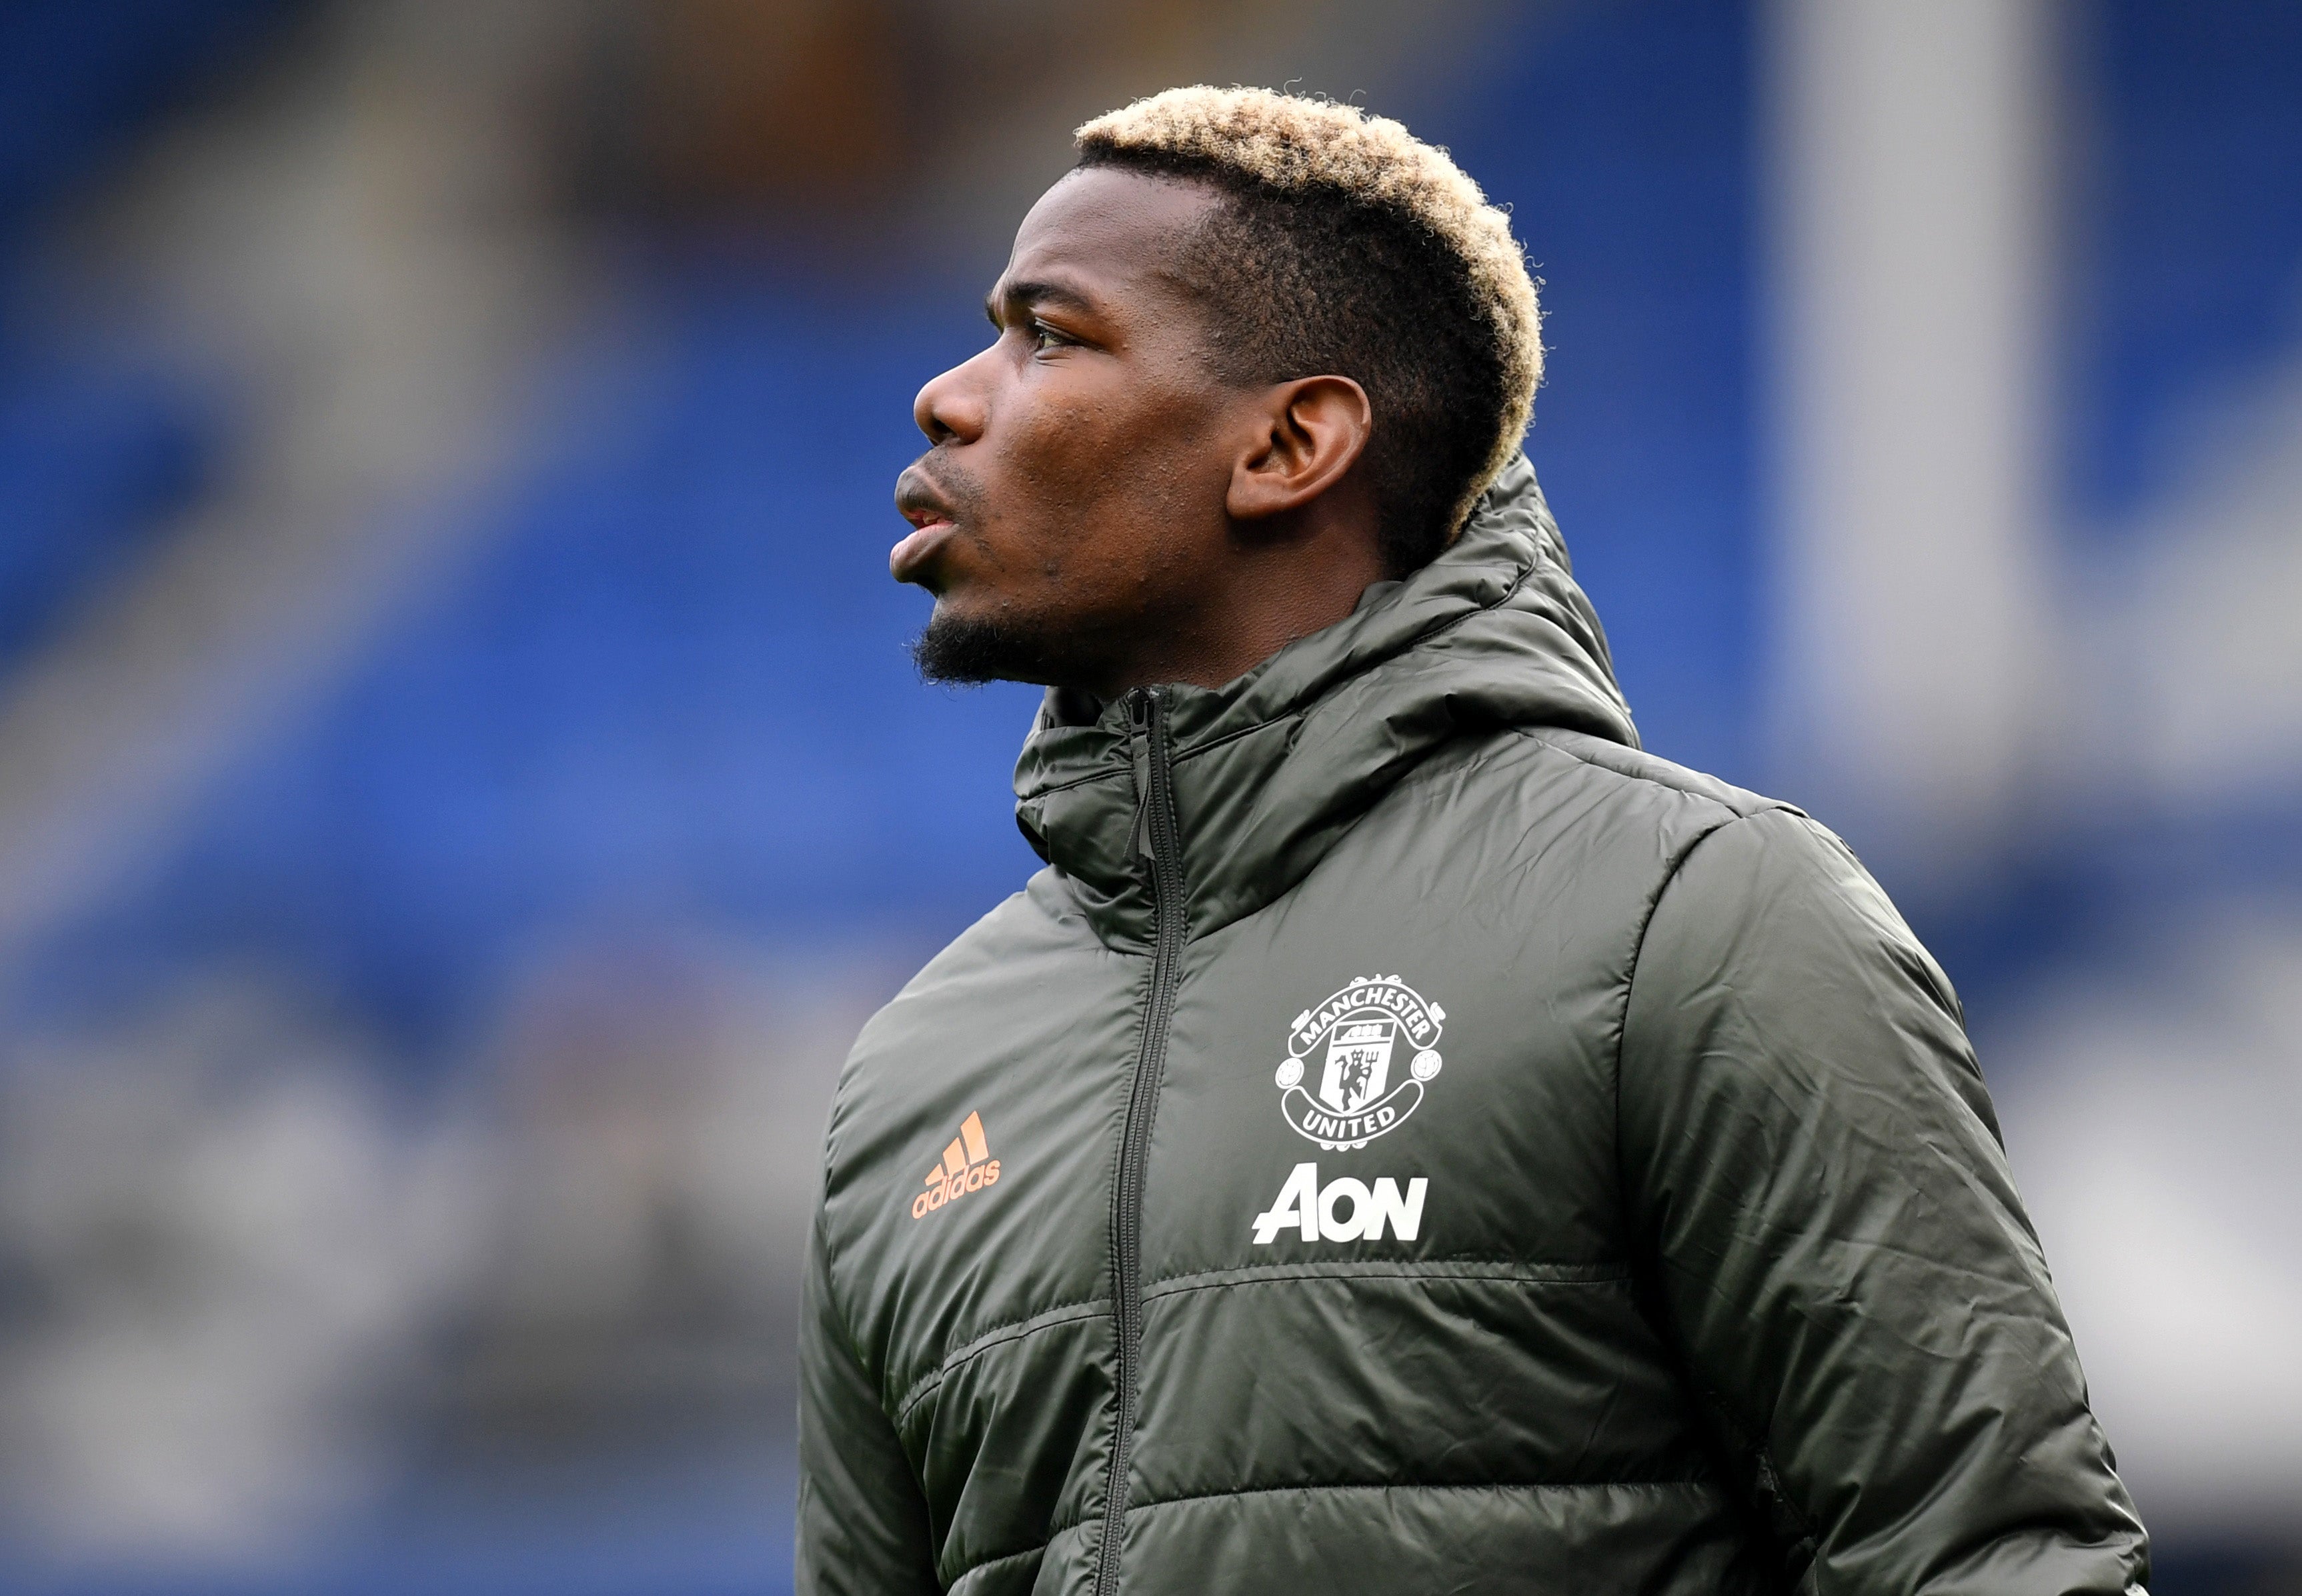 Paul Pogba was left out of the starting line-up for Manchester United’s must-win Premier League clash with Everton